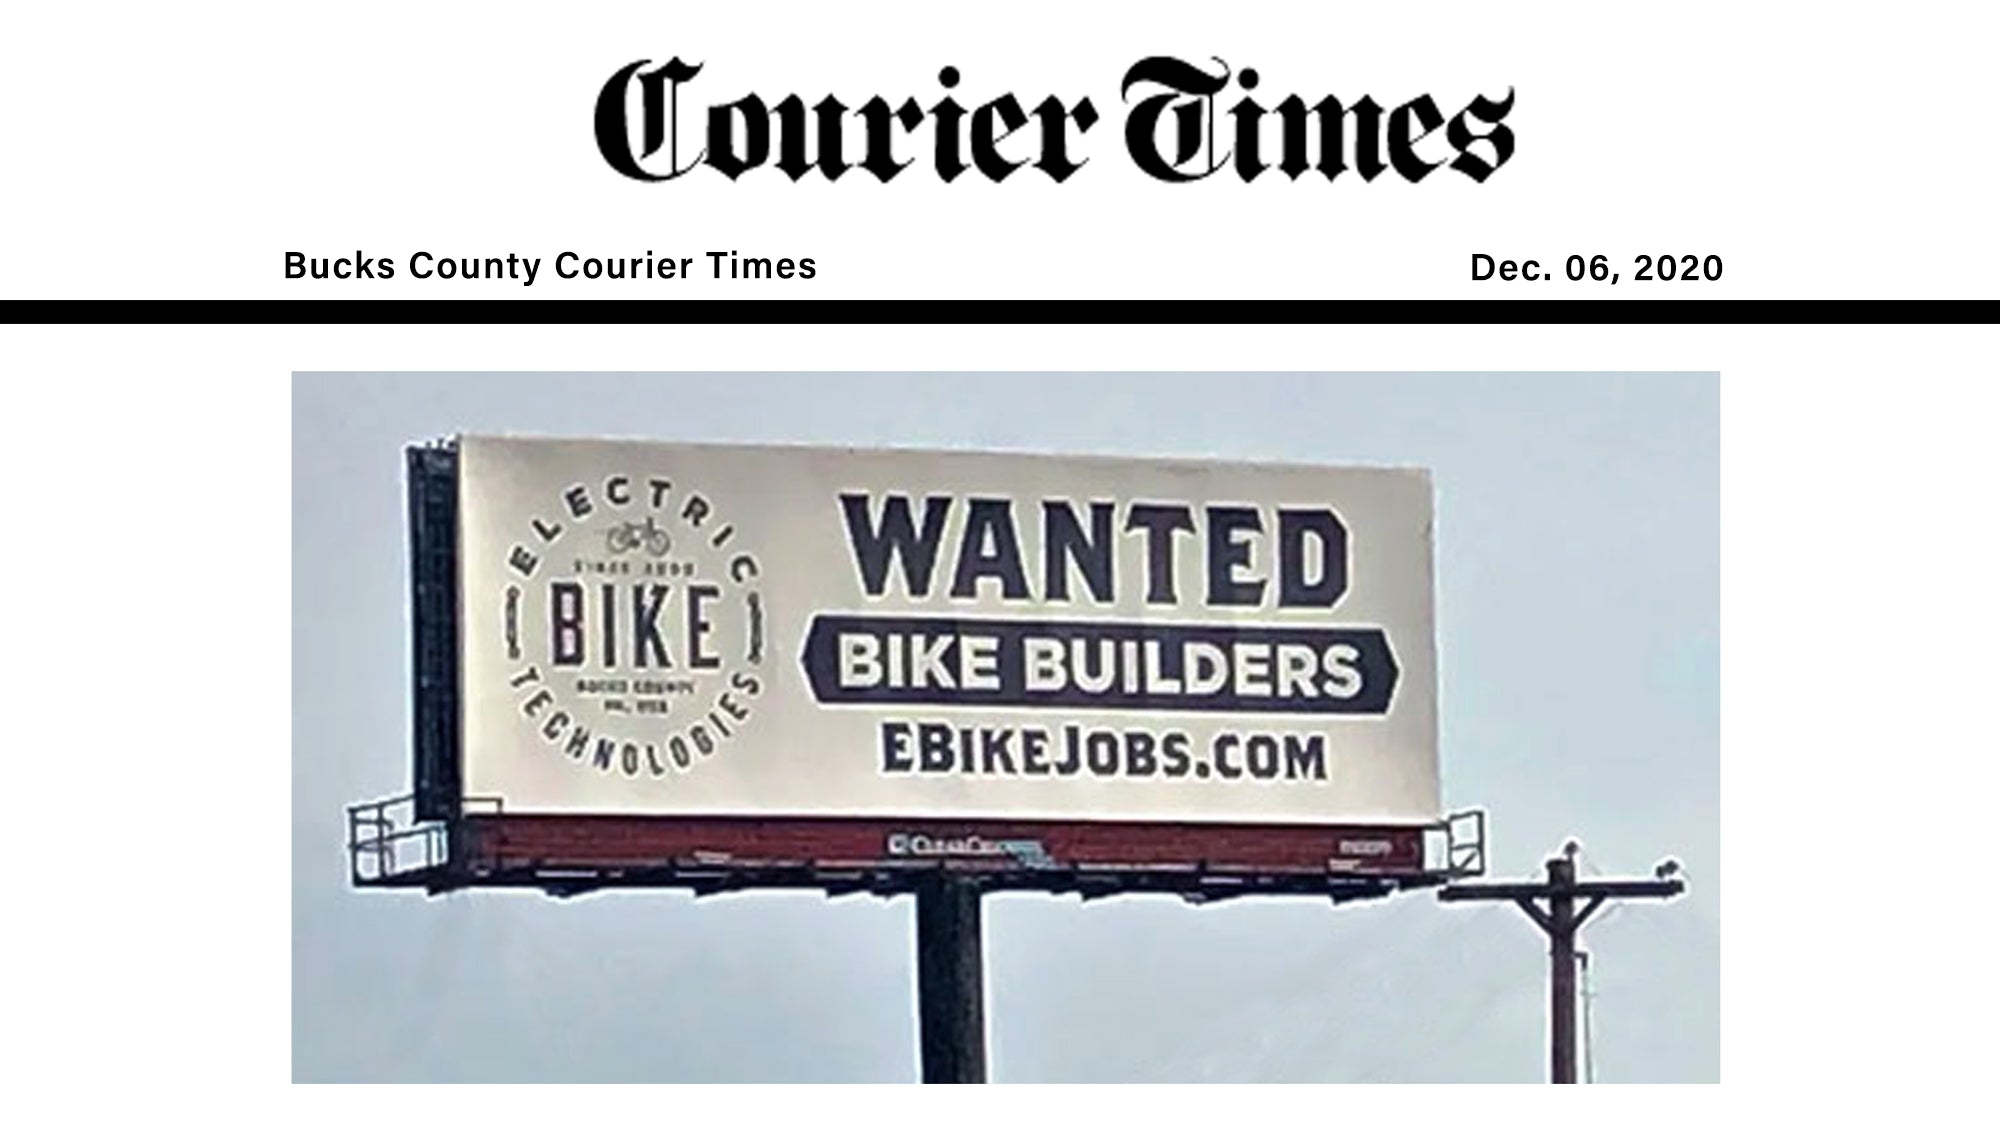 Bike Builders are Wanted, sign up at ebikejobs.com